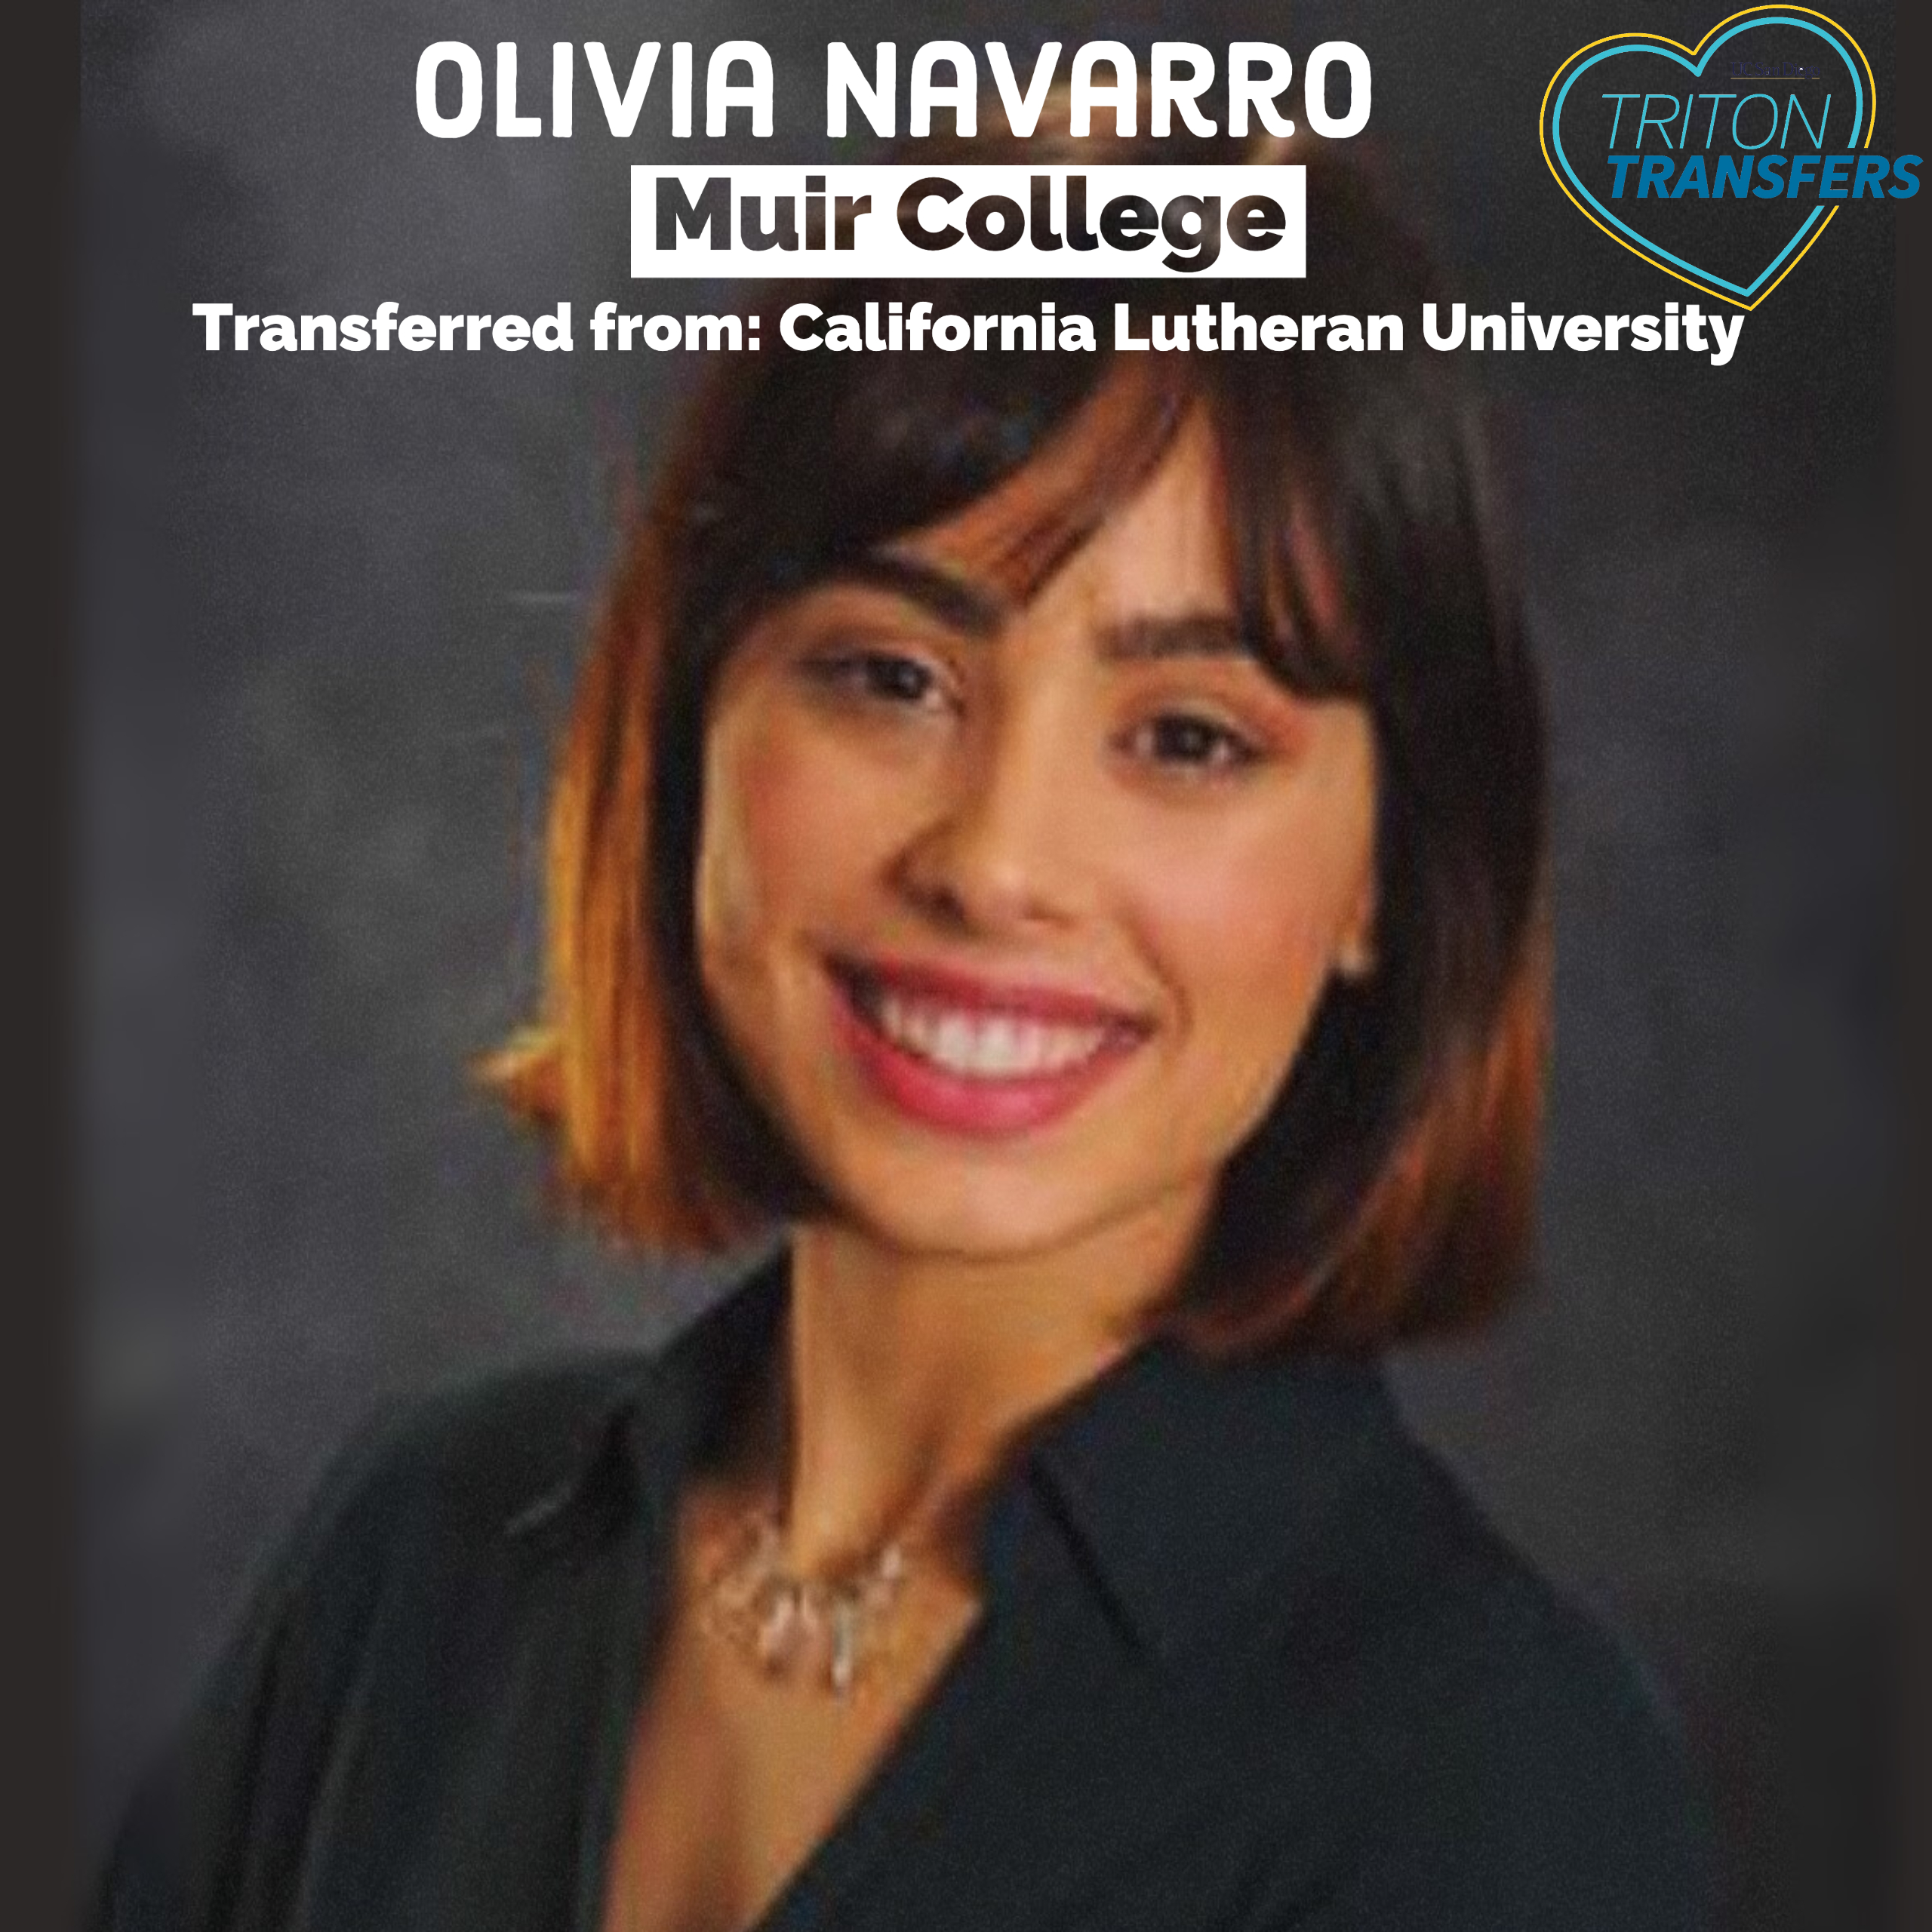 Olivia Navarro Email: olivianavarroON@gmail.com Muir College Transferred from: California Lutheran University Major: Political Science Minor: Psychology Future Plans: To find employment and work on attending law school next year potentially seeking a master's degree. Advice: Go for it! It may seem like a lot of work and a very overwhelming process, but there are a lot of resources out there for you. When it is all done it will be unbelievably worth it.